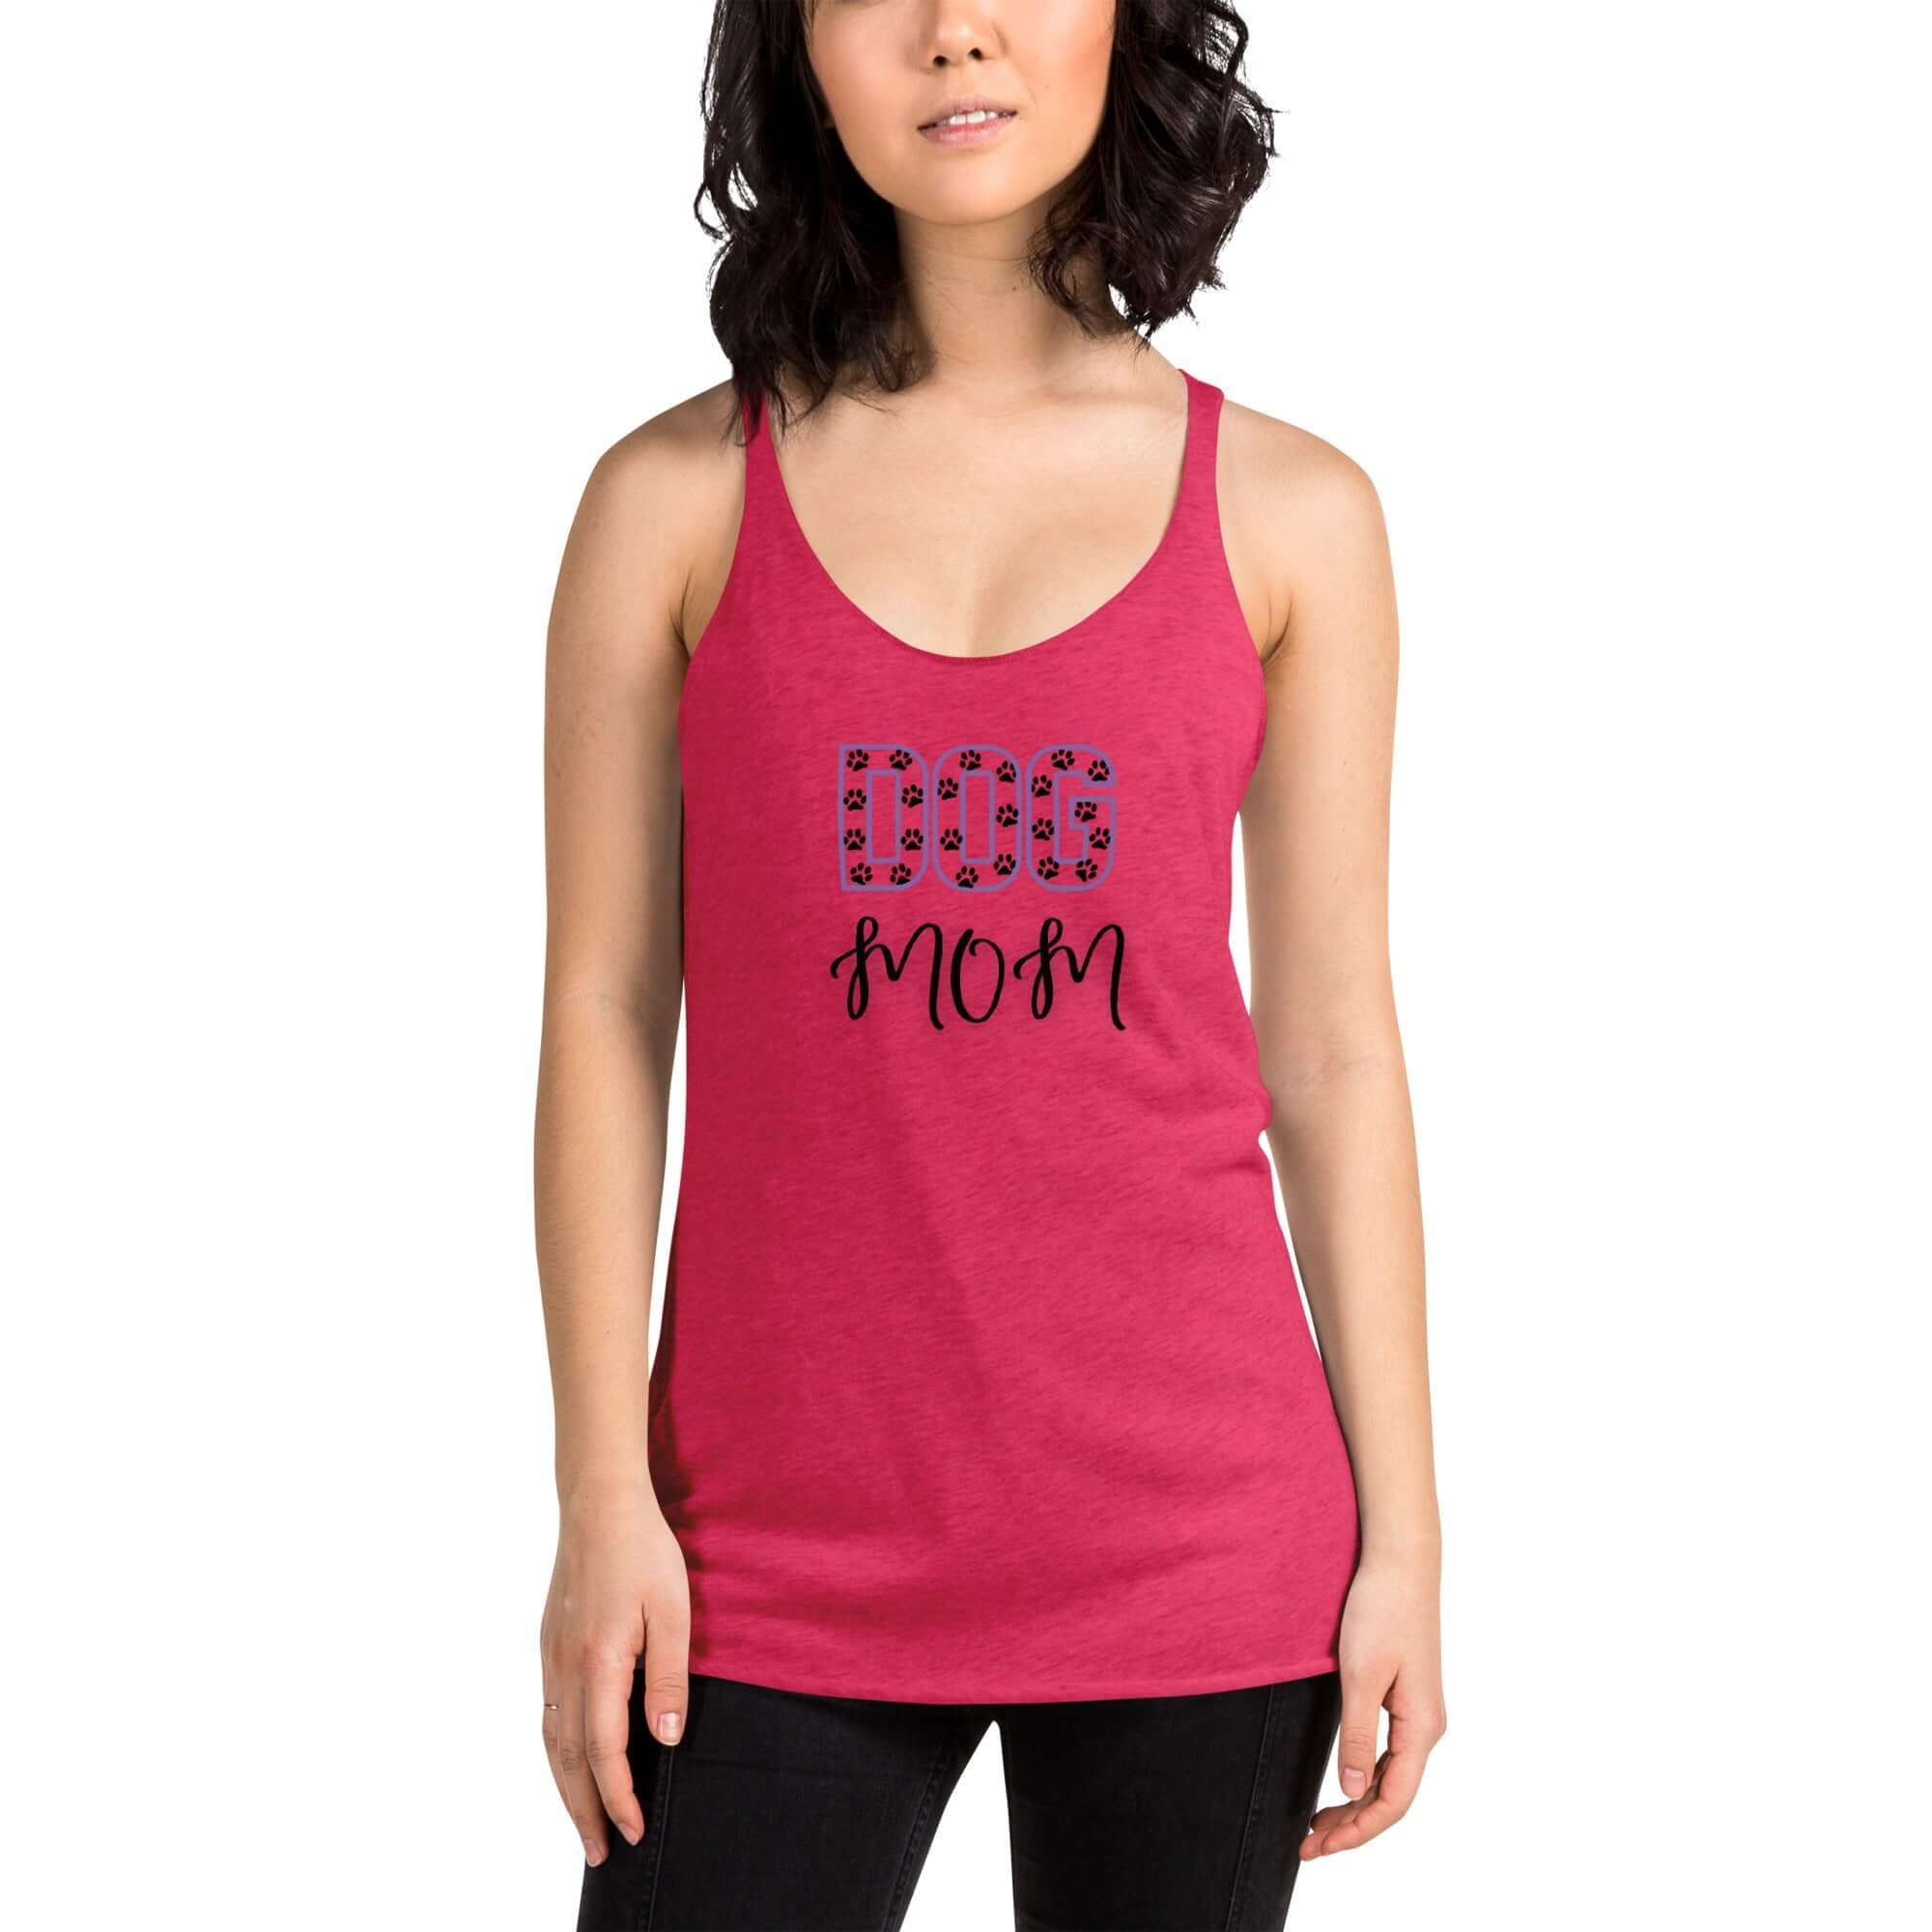 Paw Print Dog Mom Racerback Tank - TAILWAGS UNLIMITED